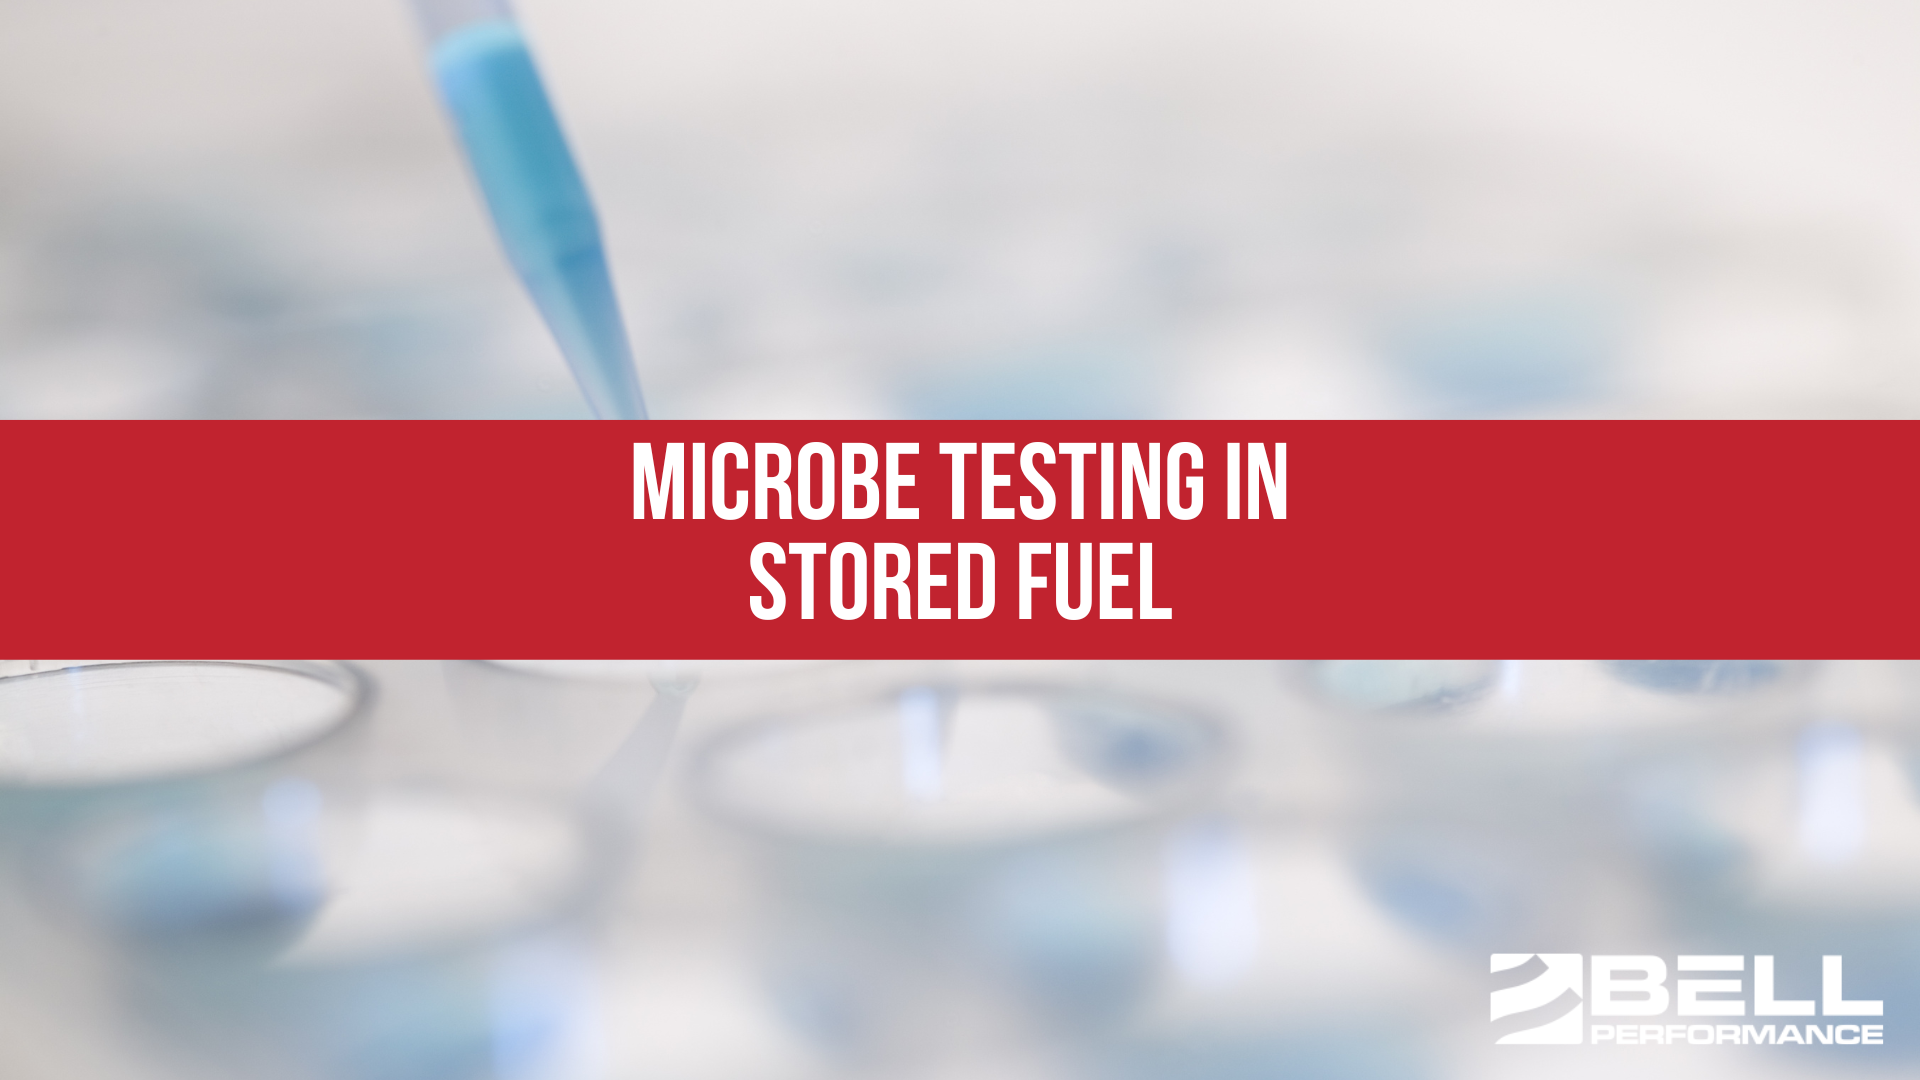 Microbe Testing in Stored Fuel